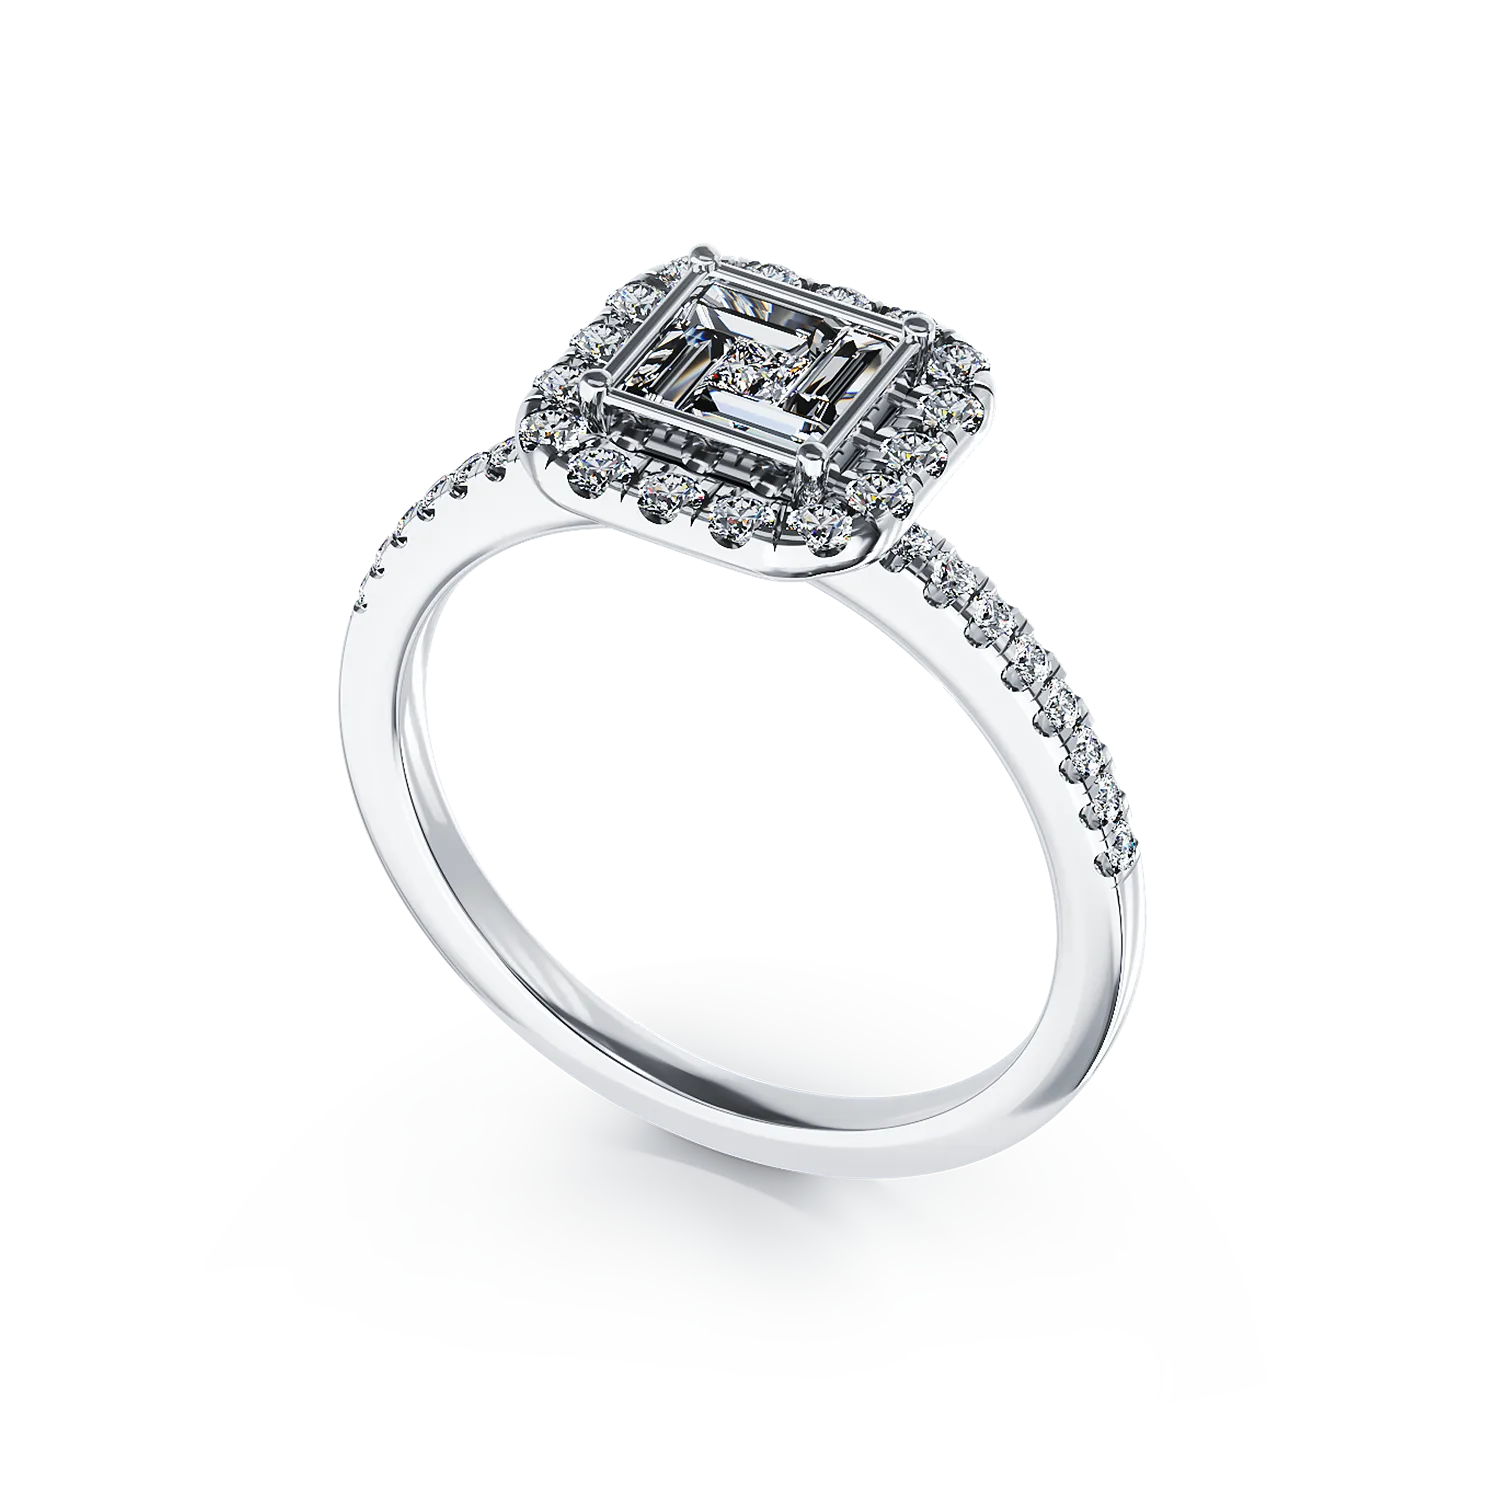 18K white gold engagement ring with diamonds of 0.44ct